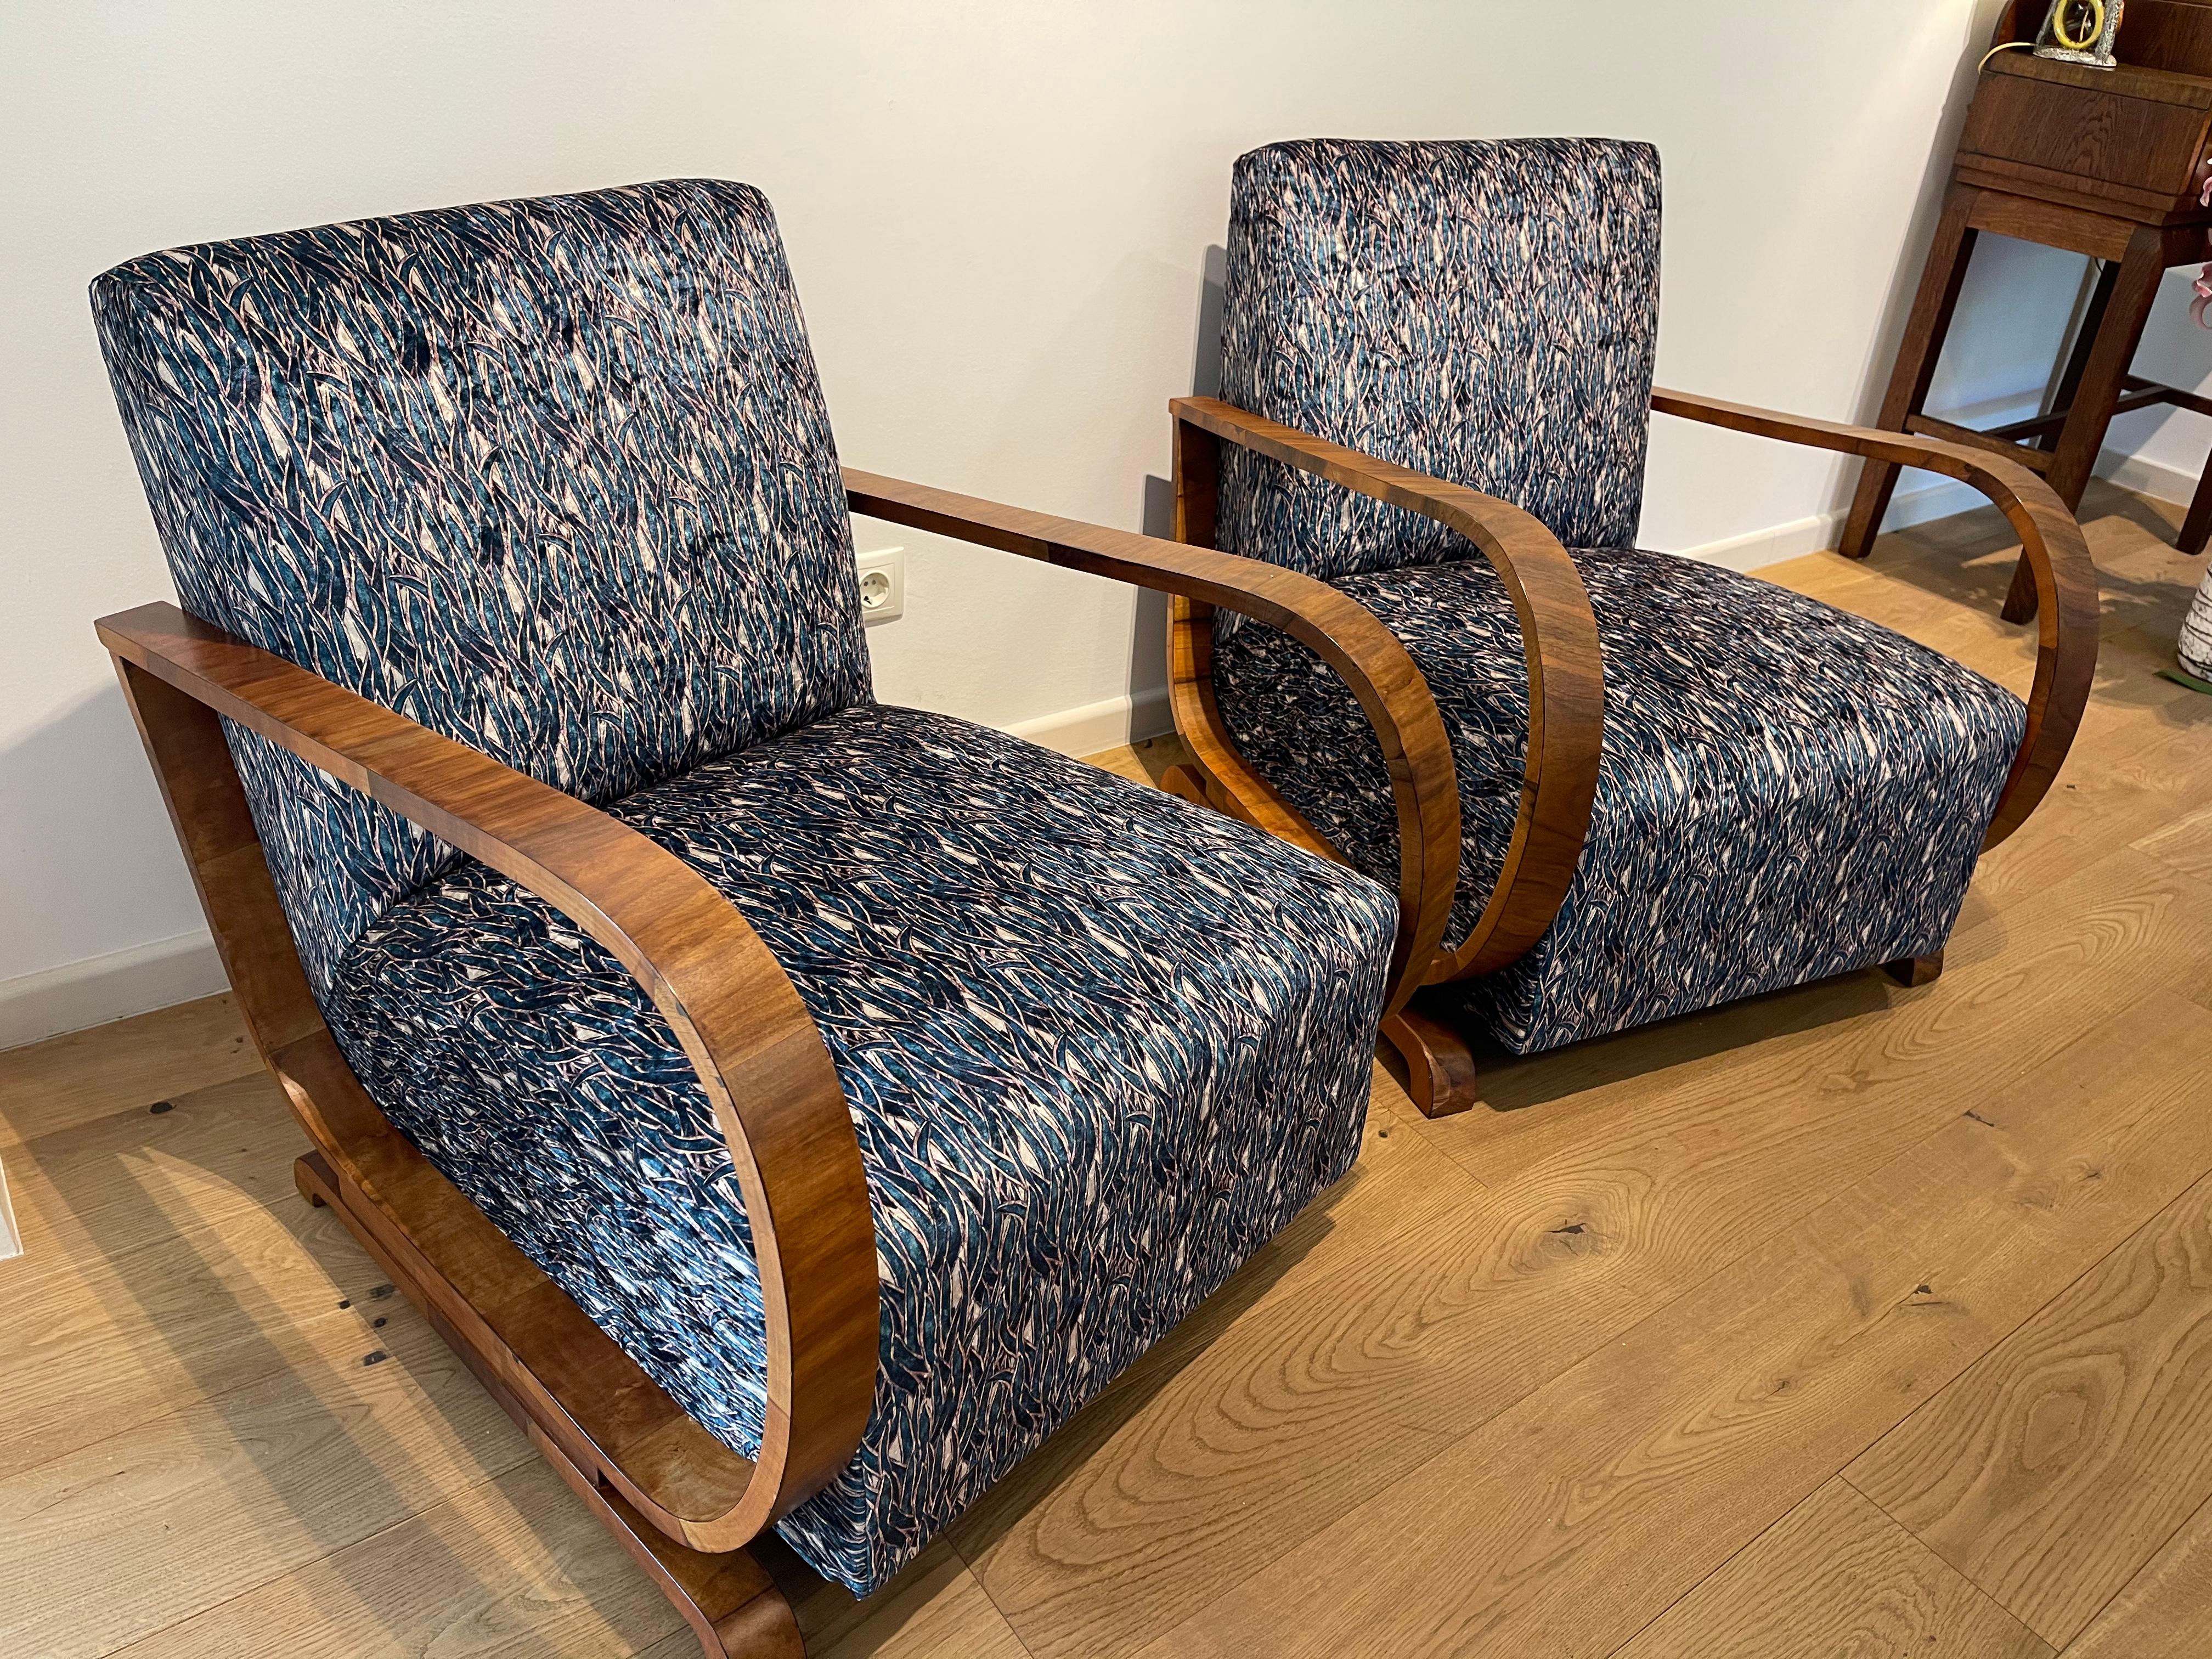 Extraordinary, gorgeous, 1930’s Art Deco pair of Lounge Chairs originating from France! Bent beechwood with walnut veneer. The walnut frame gives an expressive contrast for the sheen of the velvet upholstery. Dynamic appearance, organic curves. The